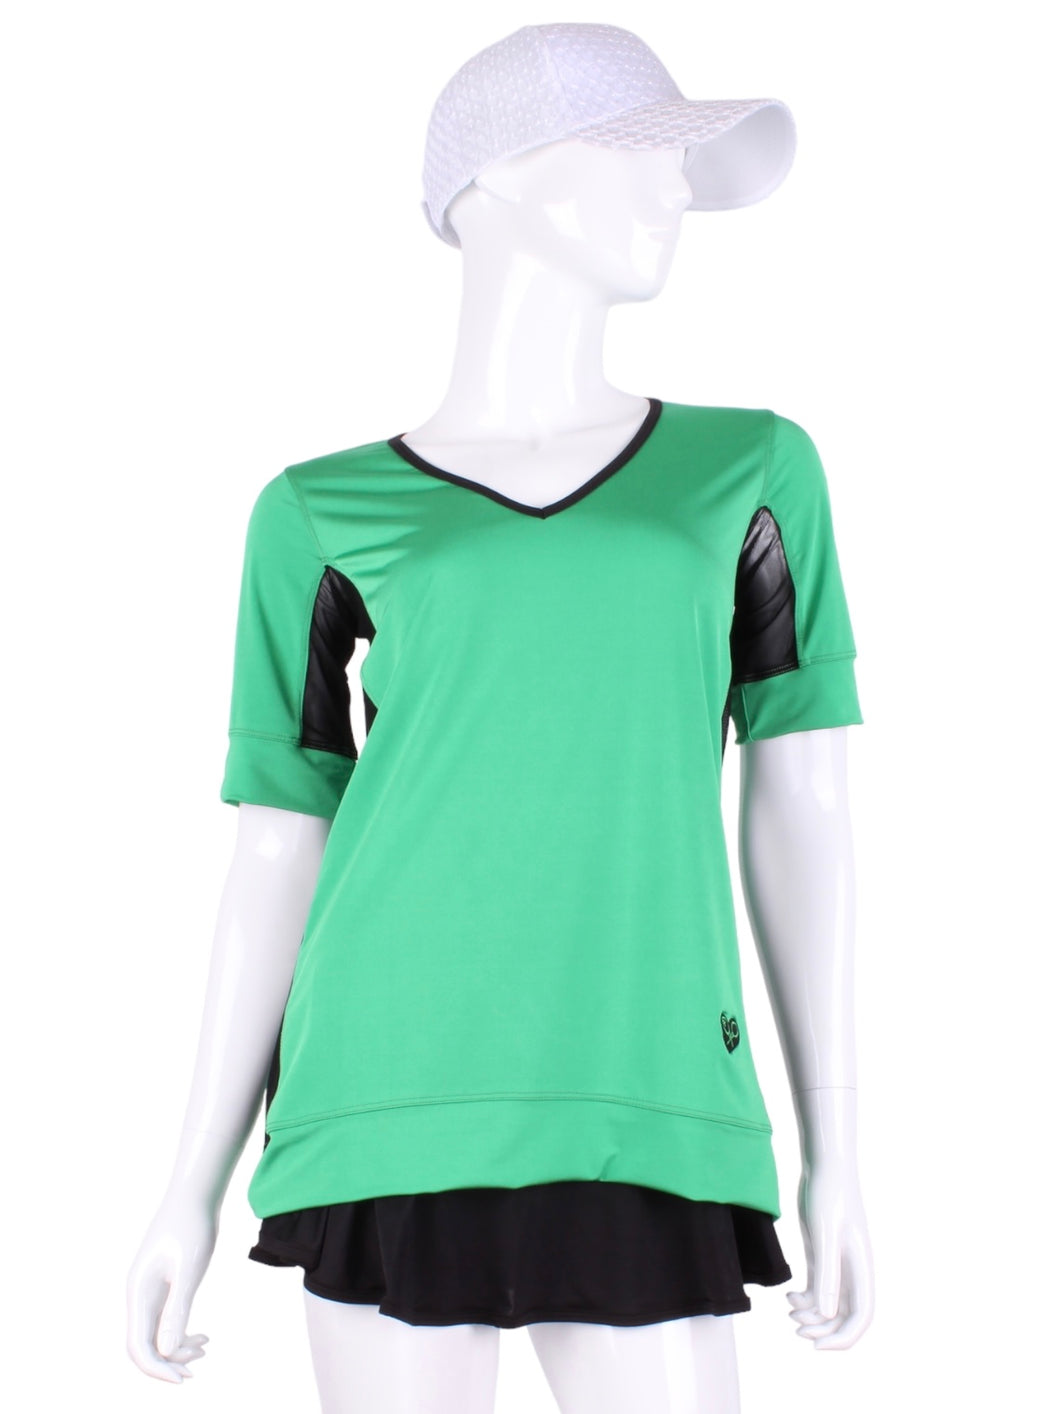 Green Baggy Vee Tee. The very comfortable Baggy Vee Tee is so cool and easy to wear.  The sides are cool airy mesh to allow for 